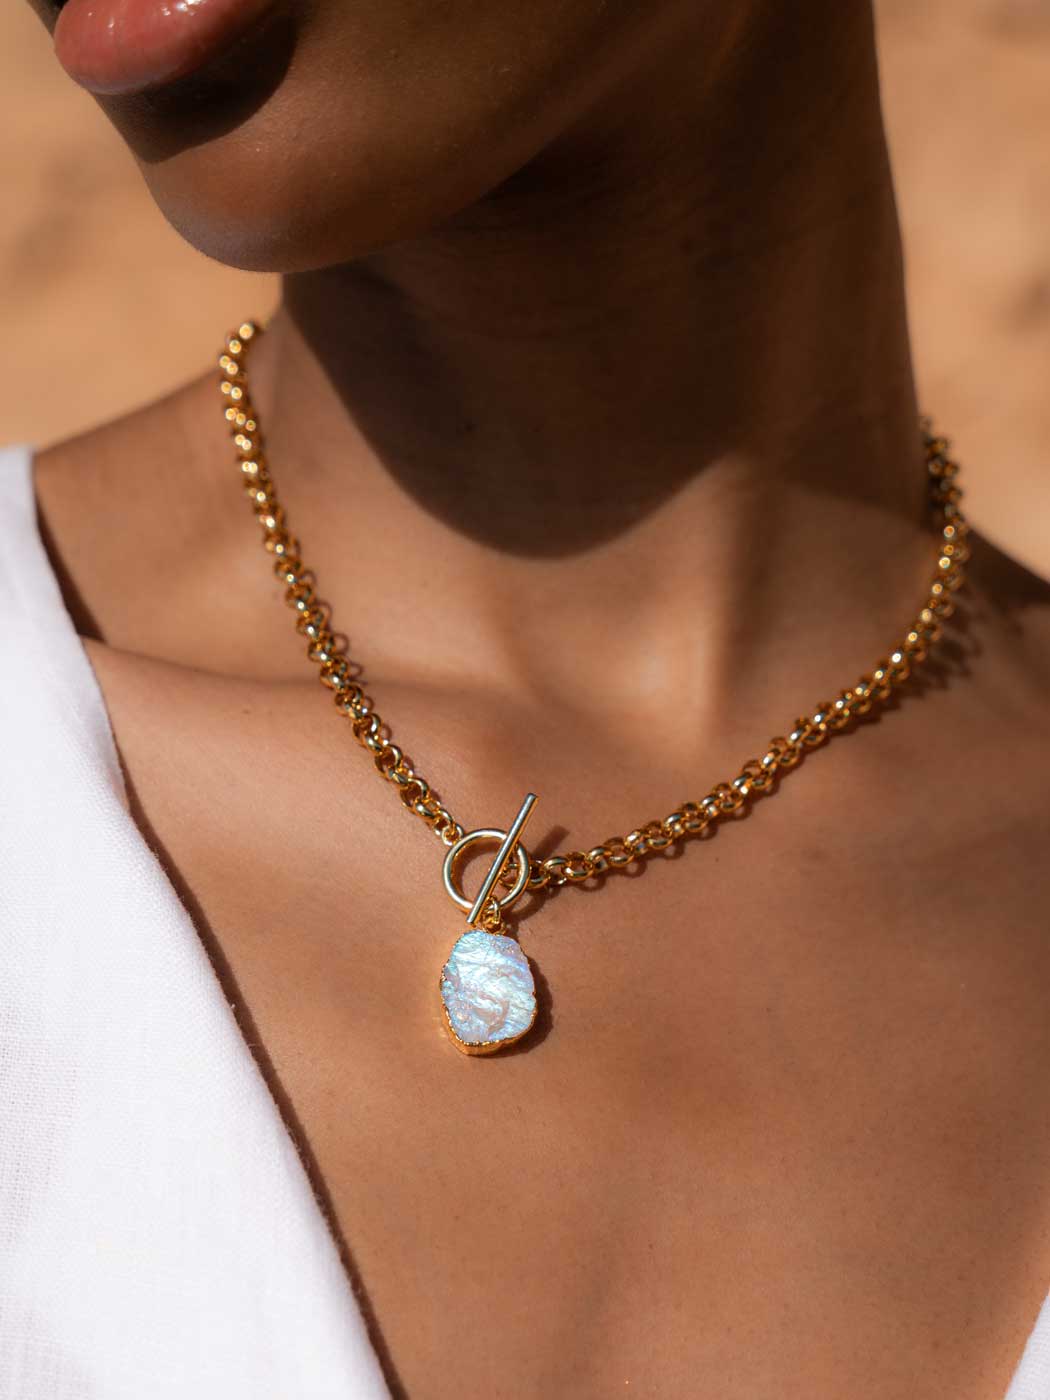 RAW CUT MOONSTONE STATEMENT NECKLACE